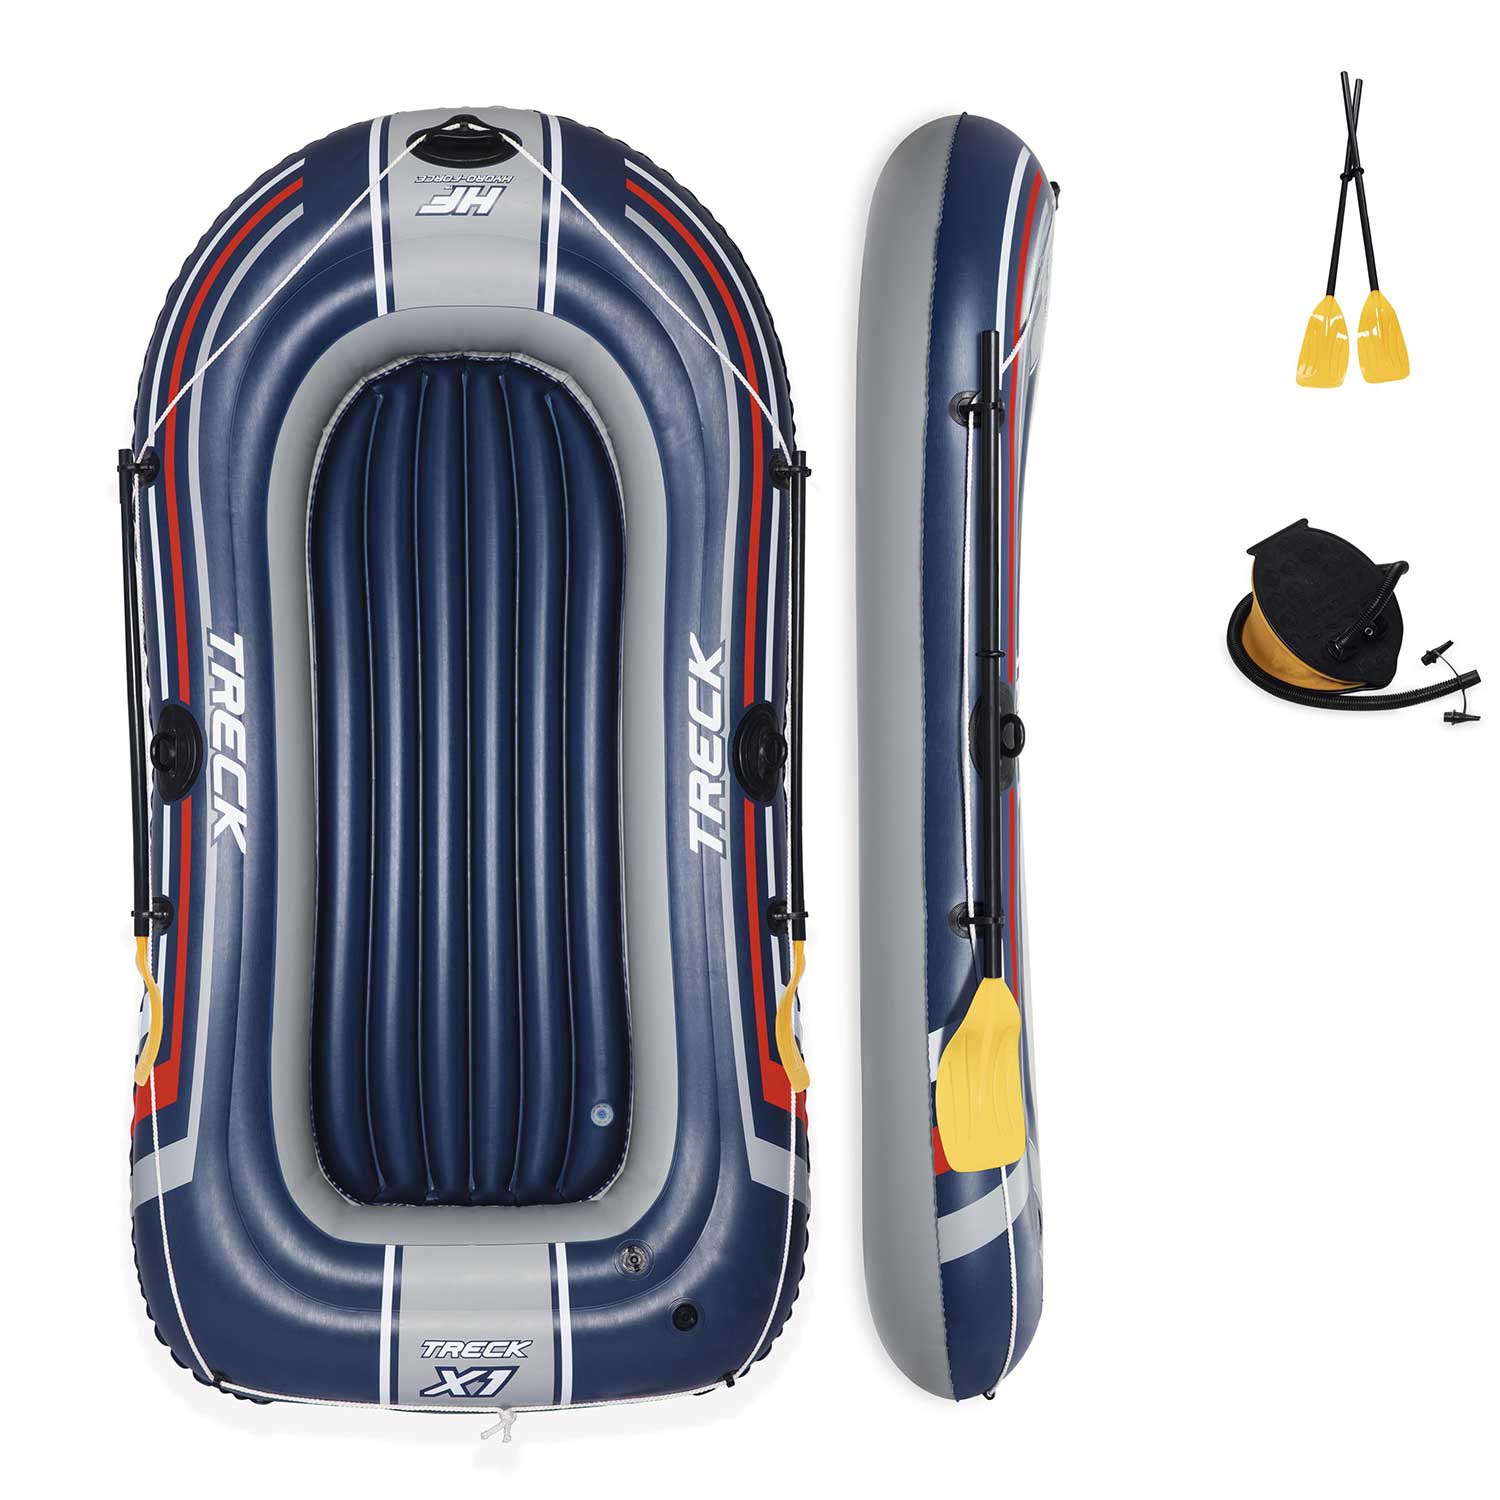 Bote inflable Raft Hydro Force Bestway 2.28m x 1.21m